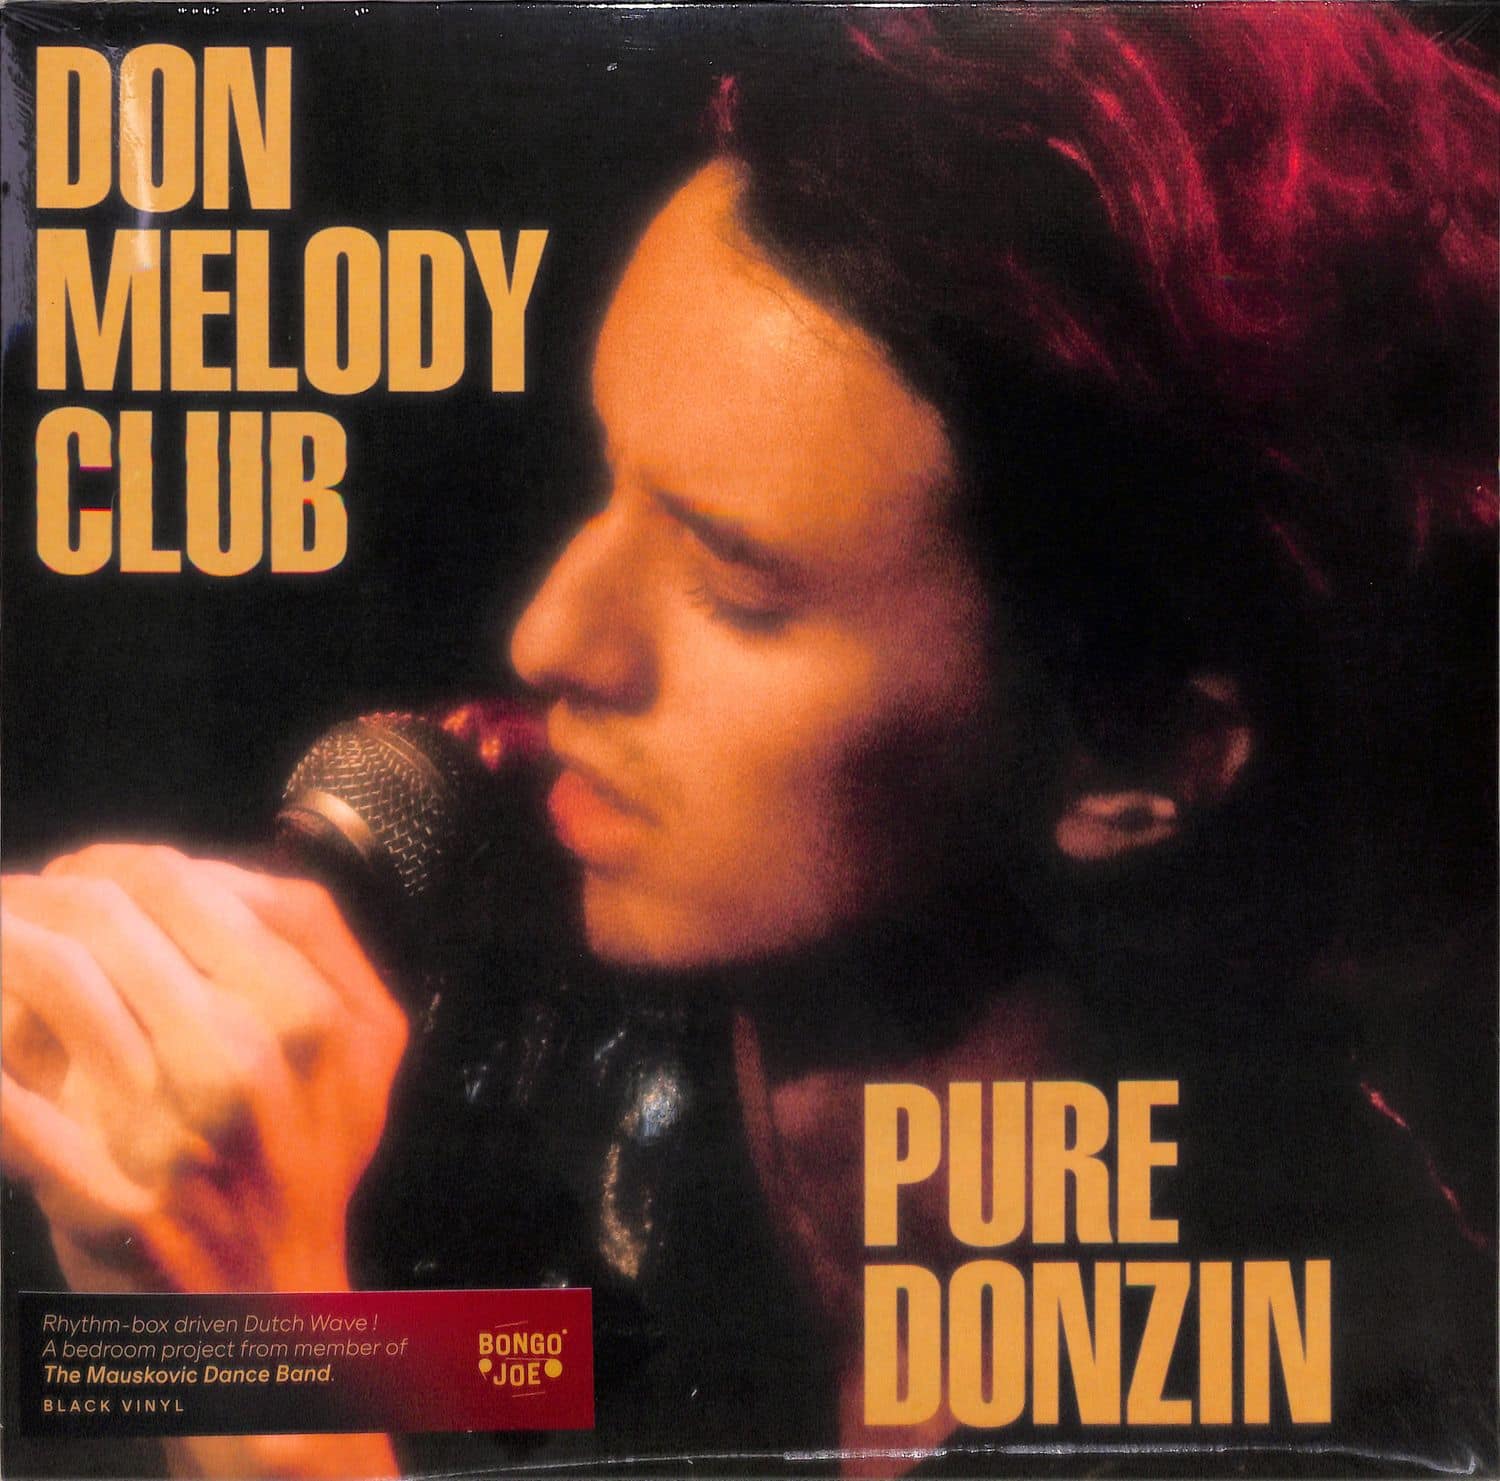 Don Melody Club - PURE DONZIN 